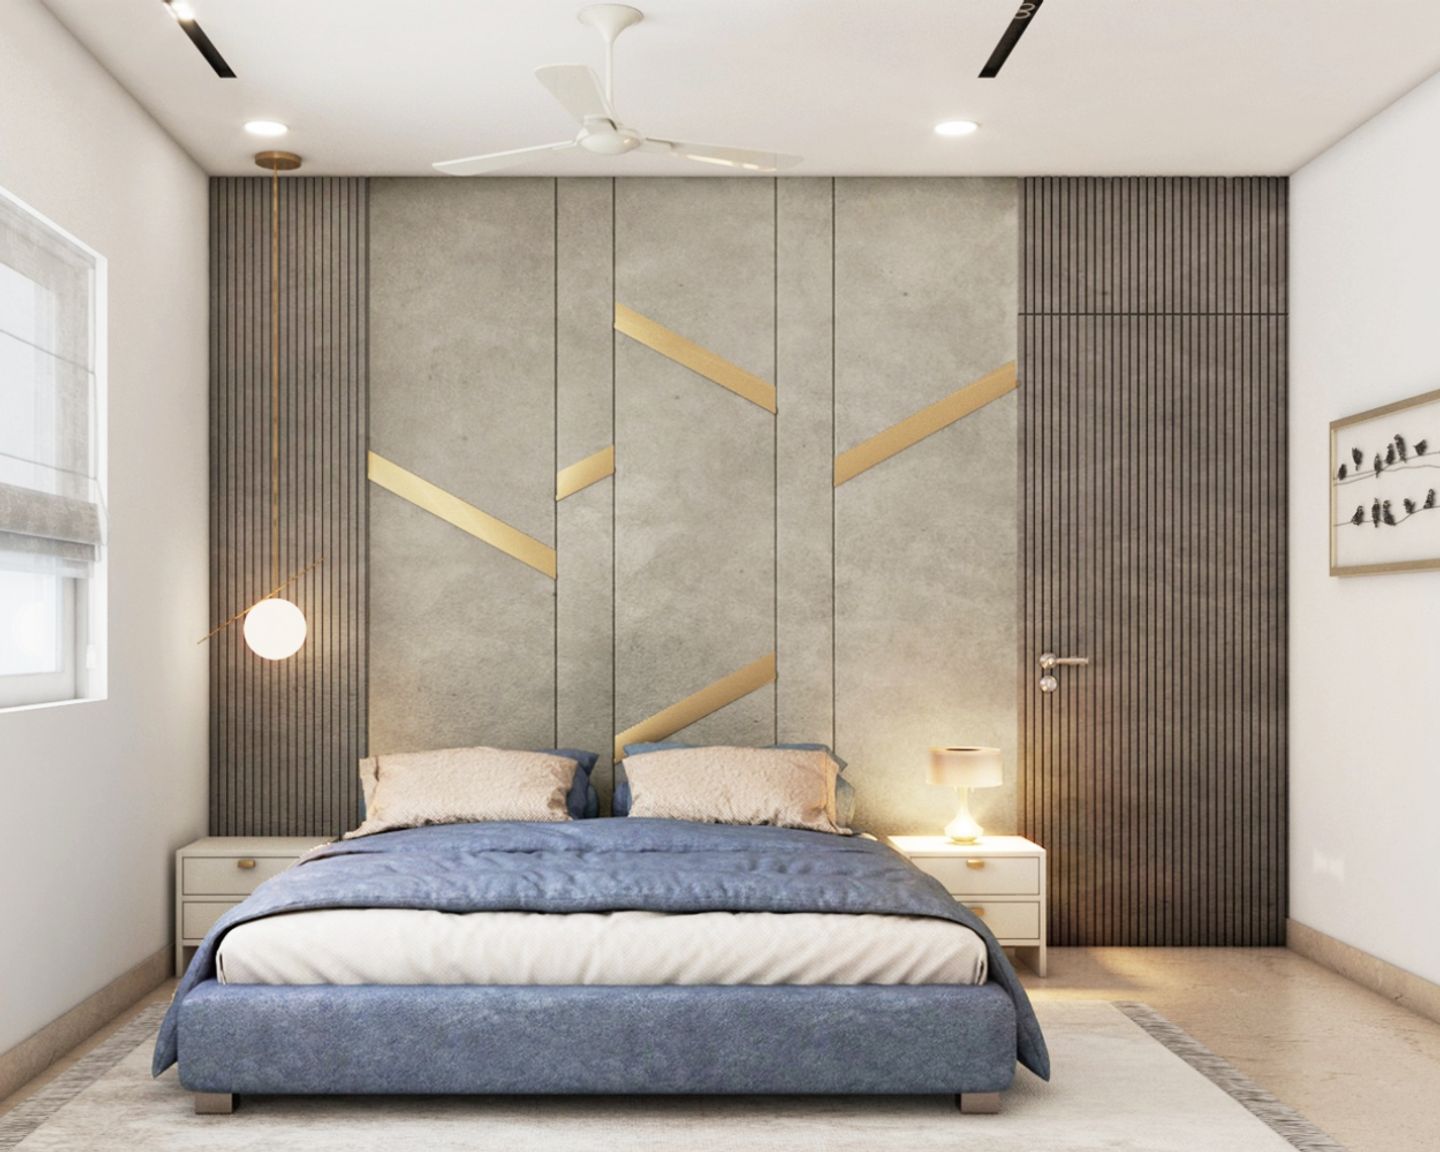 Guest Room Design With Blue Bed, White Side Tables, Light Grey Accent Wall, Fluted Panelling And Gold Inlay - Livspace